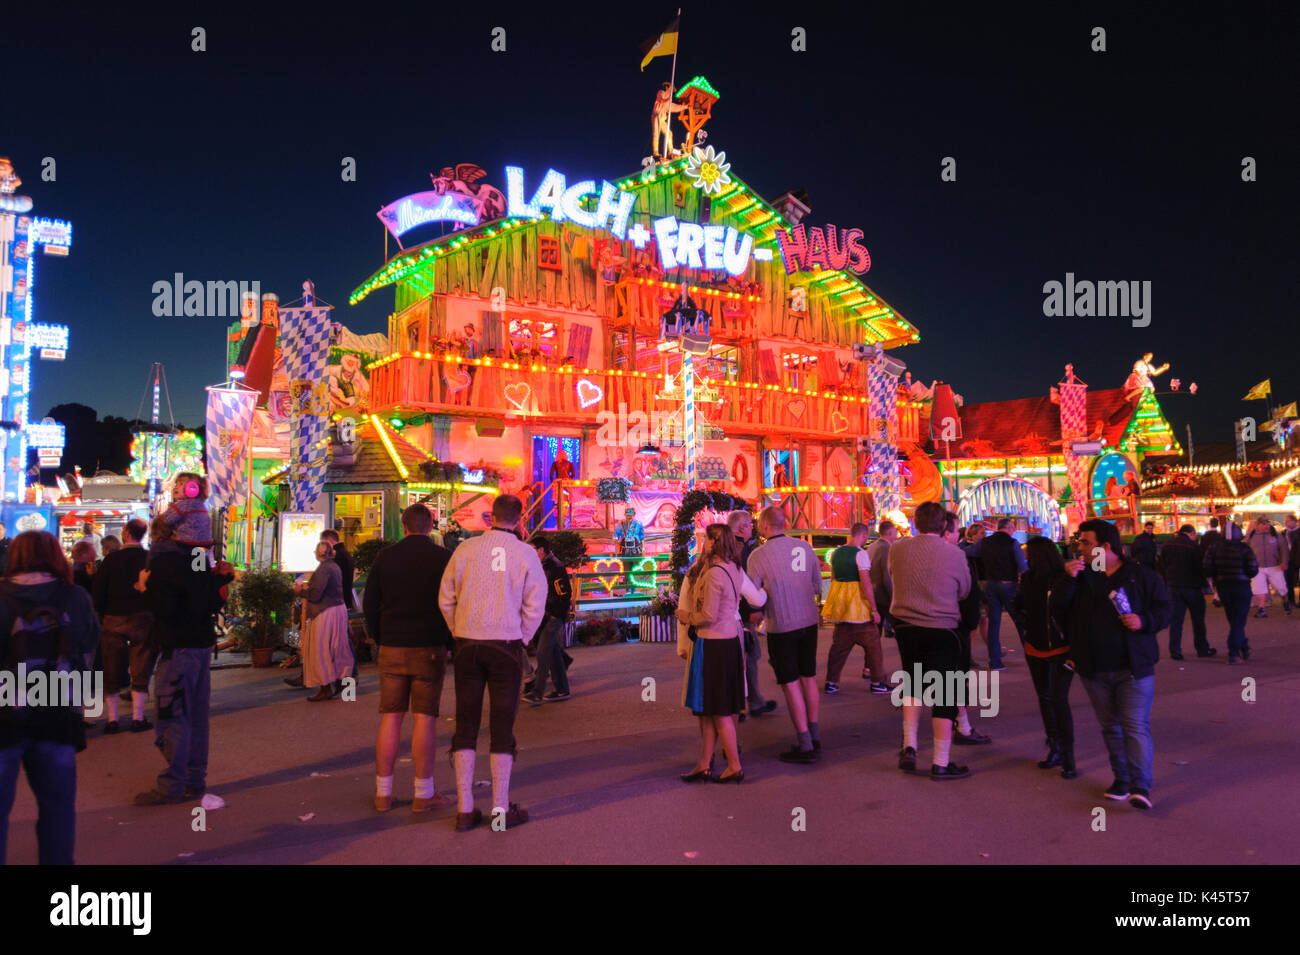 Oktoberfest in Munich is the biggest beer festival of the world with many huge beer tents, carousels, and amusement huts Stock Photo